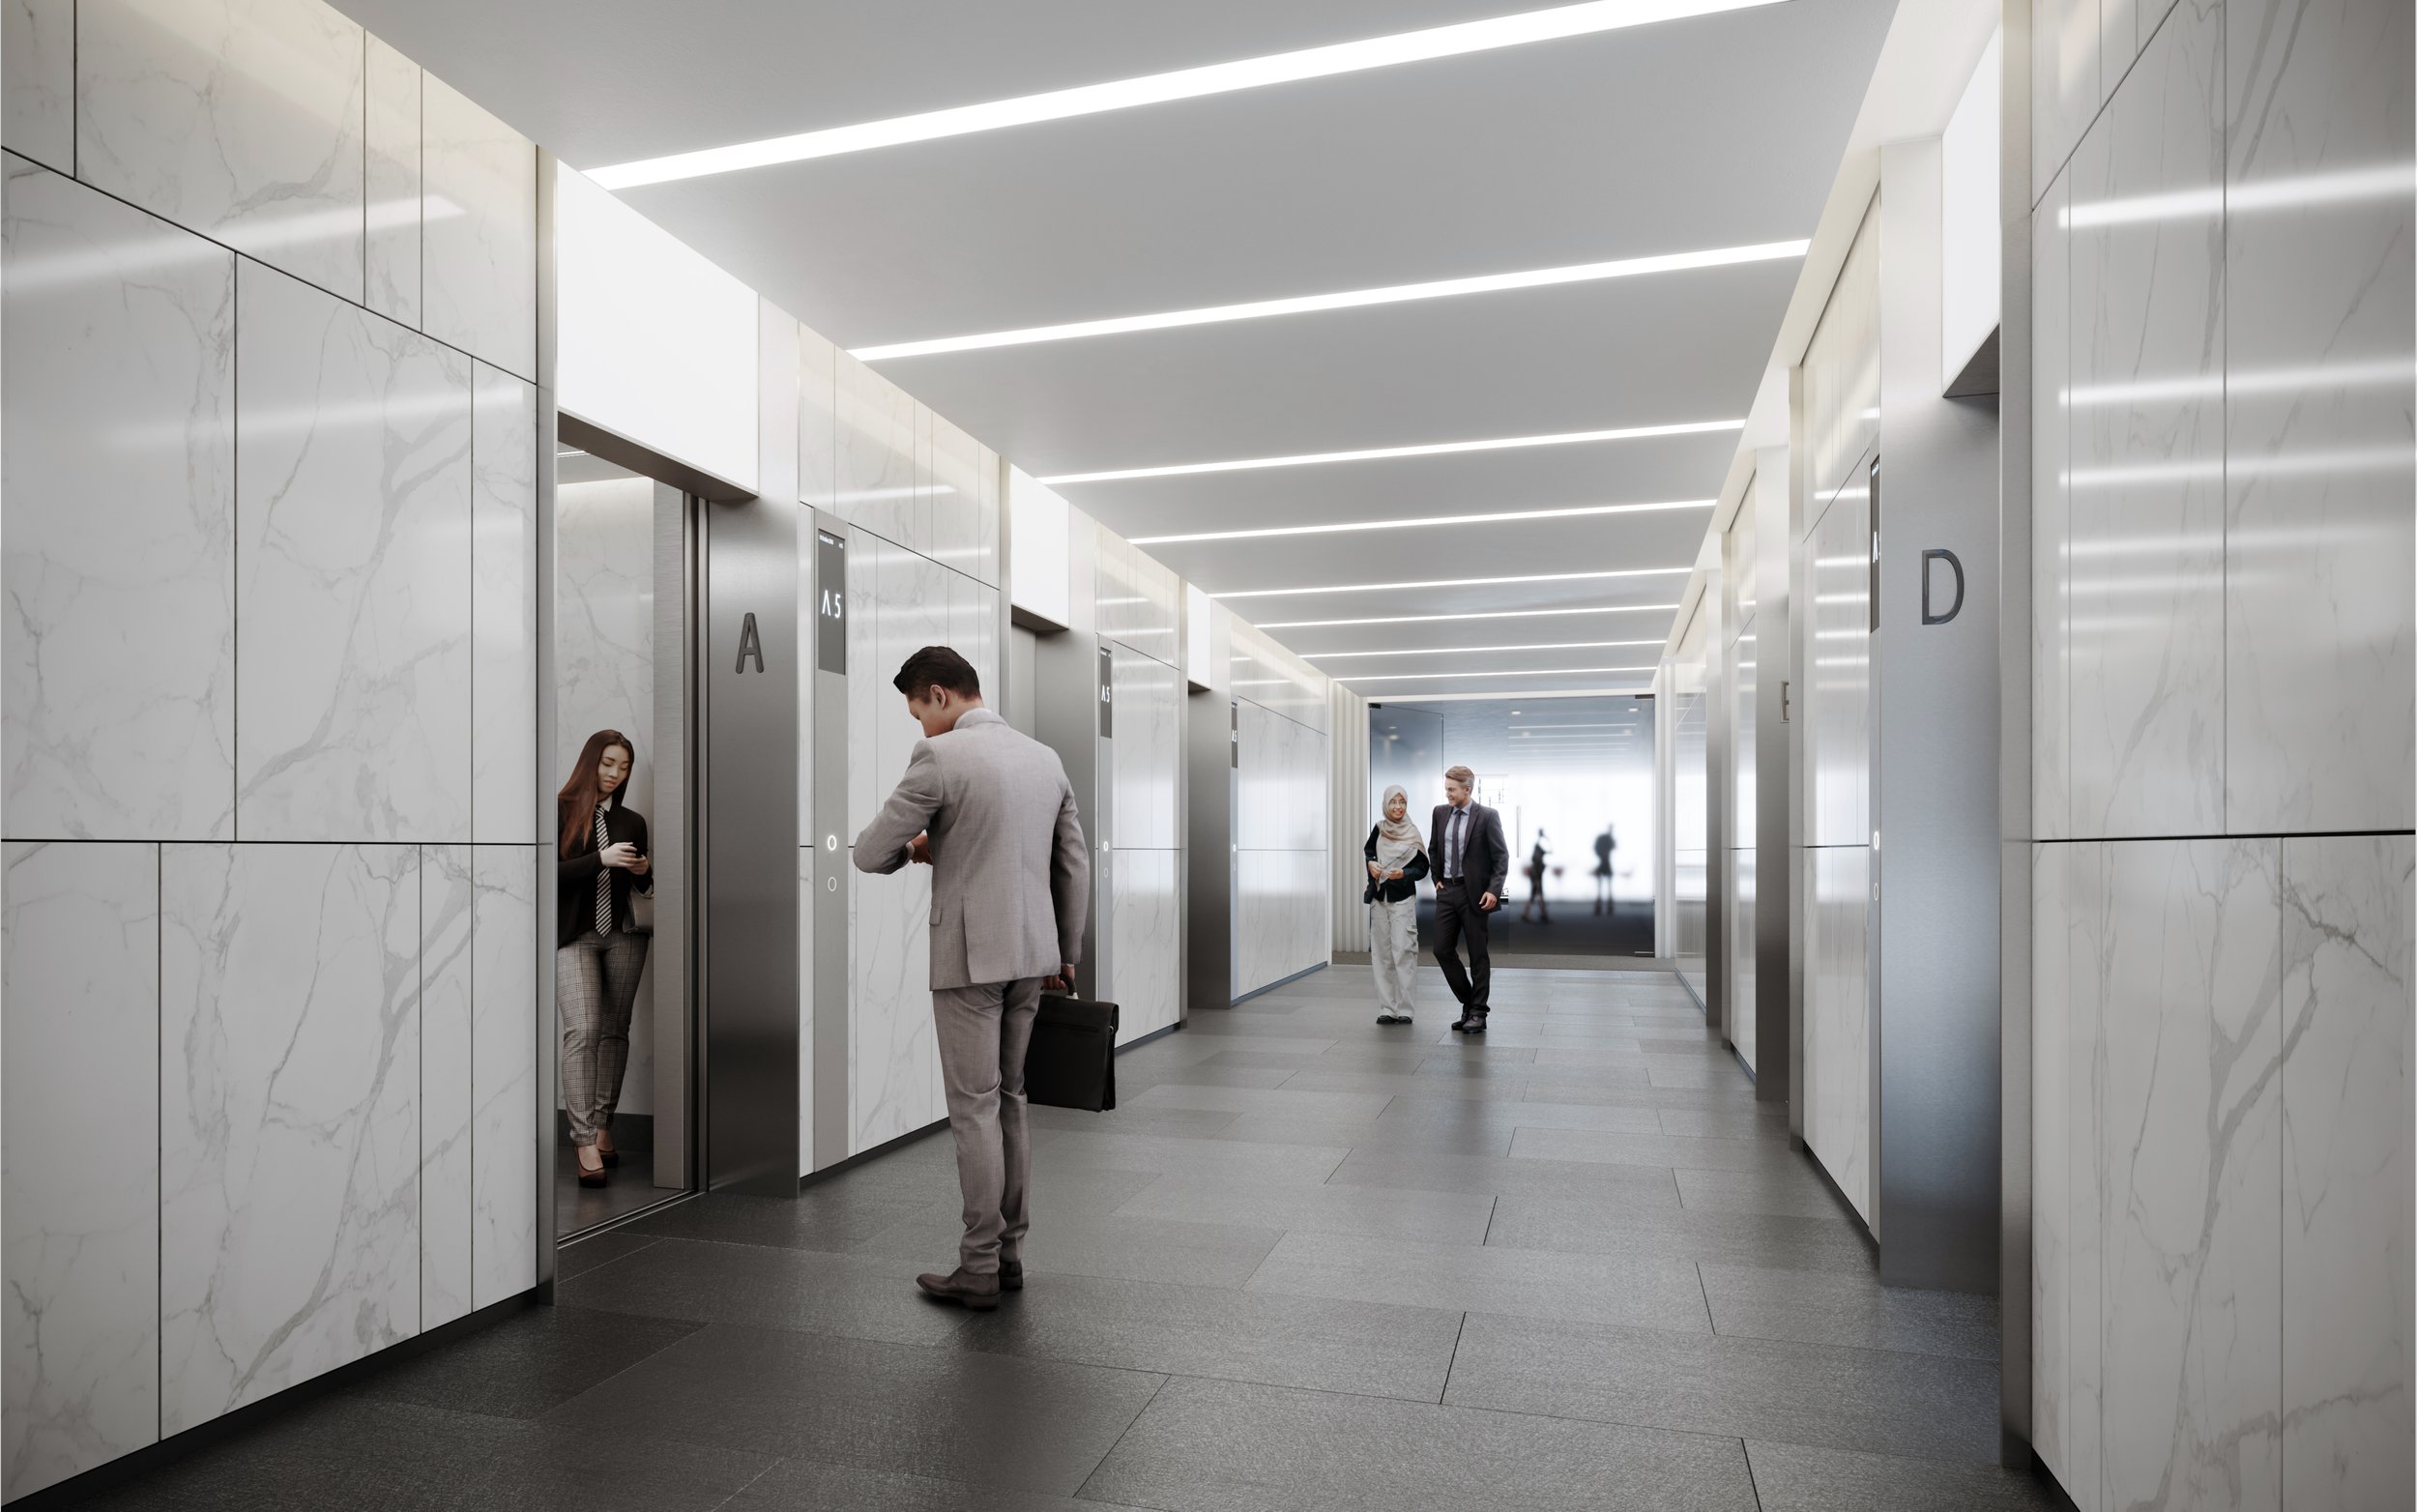 IN03_Interior_Typical lift lobby.jpg